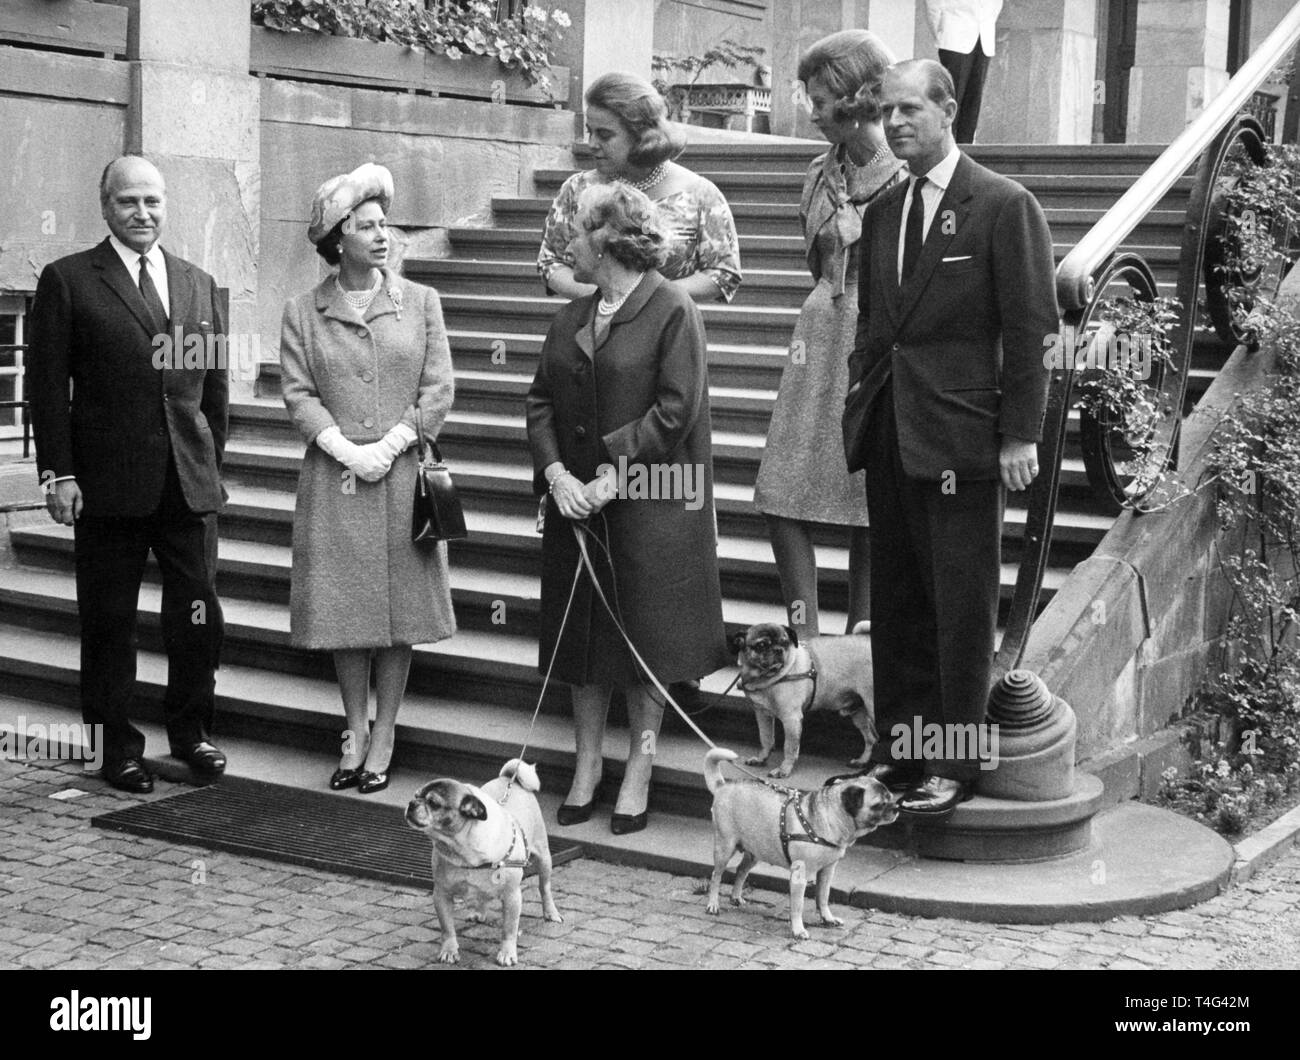 Britain's Queen Elizabeth II and her husband Prince Philip, The Duke of Edinburgh during a visit to Prince Ludwig of Hesse and his wife, Princess Margaret Campbell Geddes at Wolfsgarten Castle in Langen, near Darmstadt, West Germany on May 20, 1965, on the third day of the British royal's tour of West Germany. Seen at the castle entrance are L-R: Prince Ludwig, the Queen, Princess Beatrix of Hohenlohe Langenburg, Princess Margaret (holding dogs? leads),  Princess Christina of Hesse and Prince Philip. | usage worldwide Stock Photo